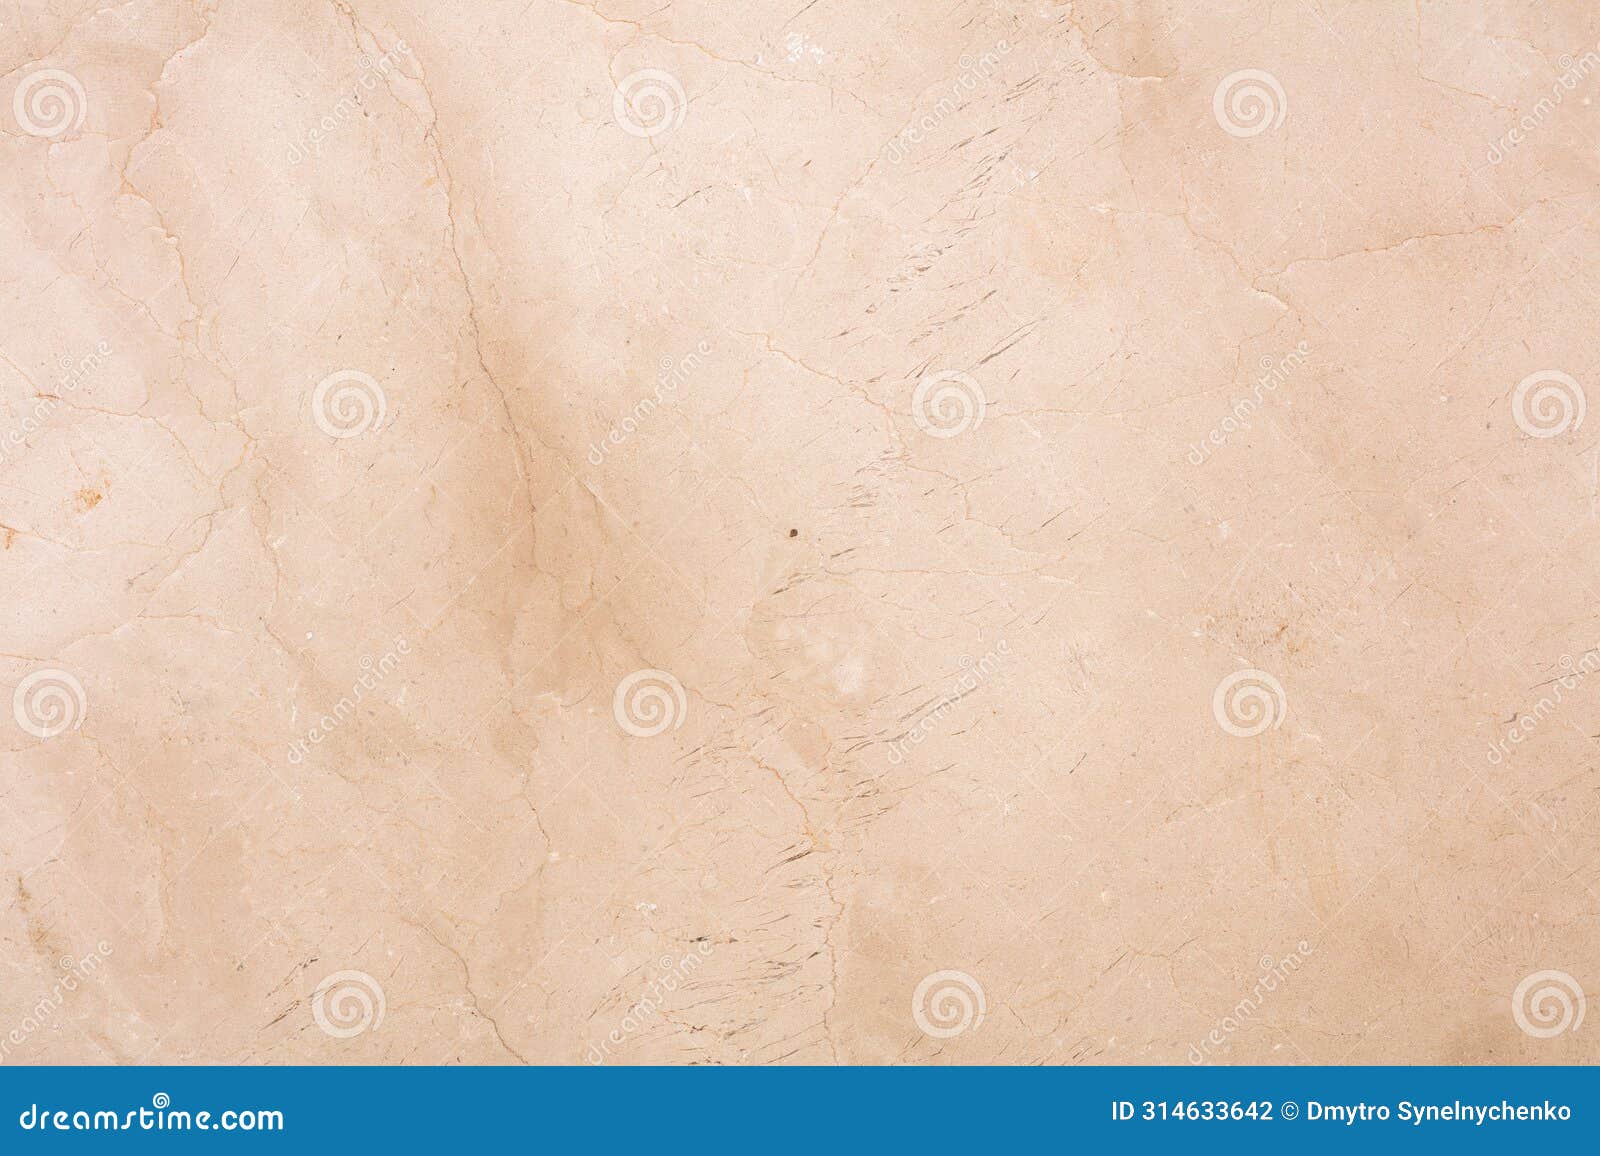 new ivory cream coto, marfil - marble background, texture in stylish light brown color for your individual 